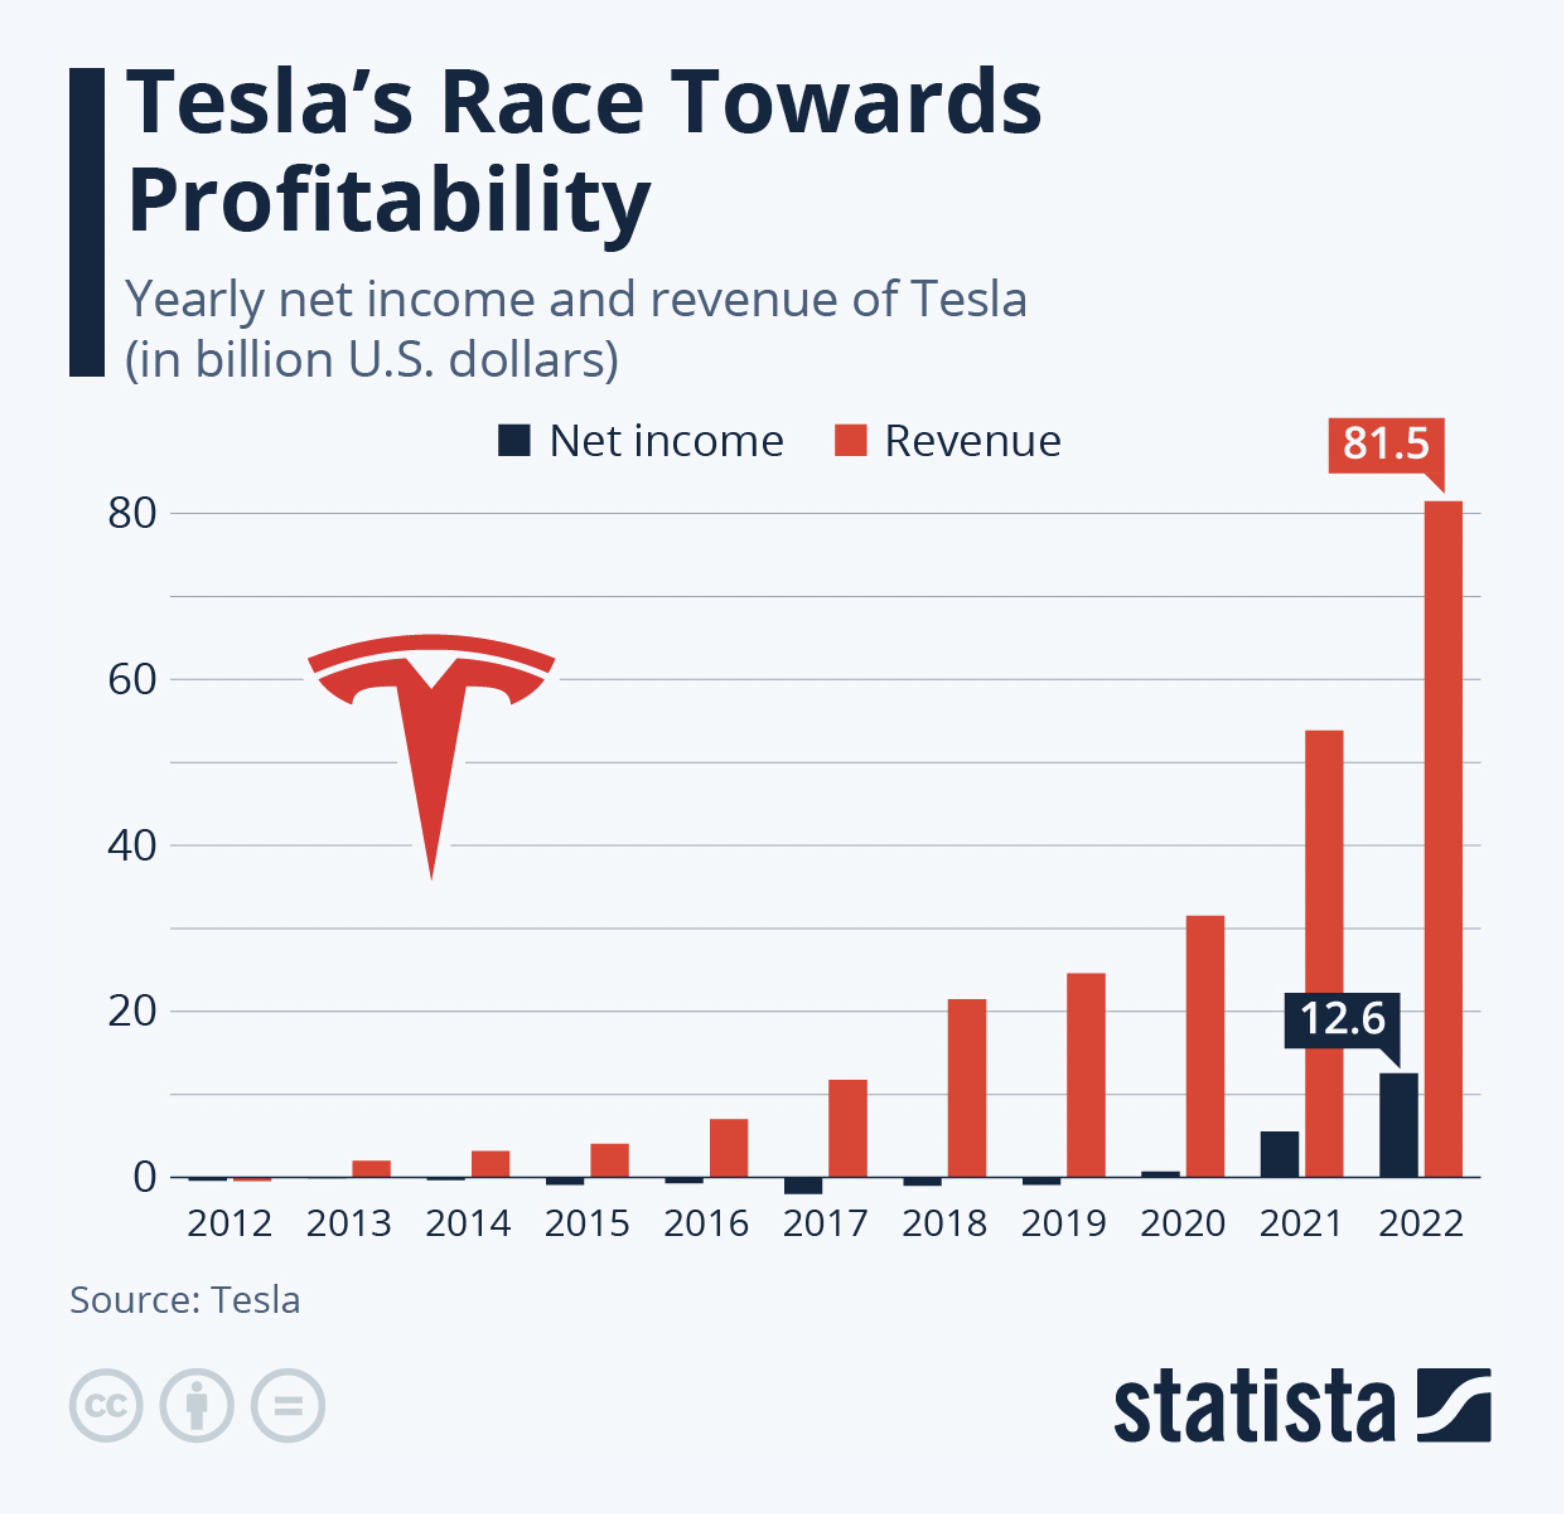 Actual Tesla revenue CAGR since 2015 is 55%--even more than Musk's 2015 claim.